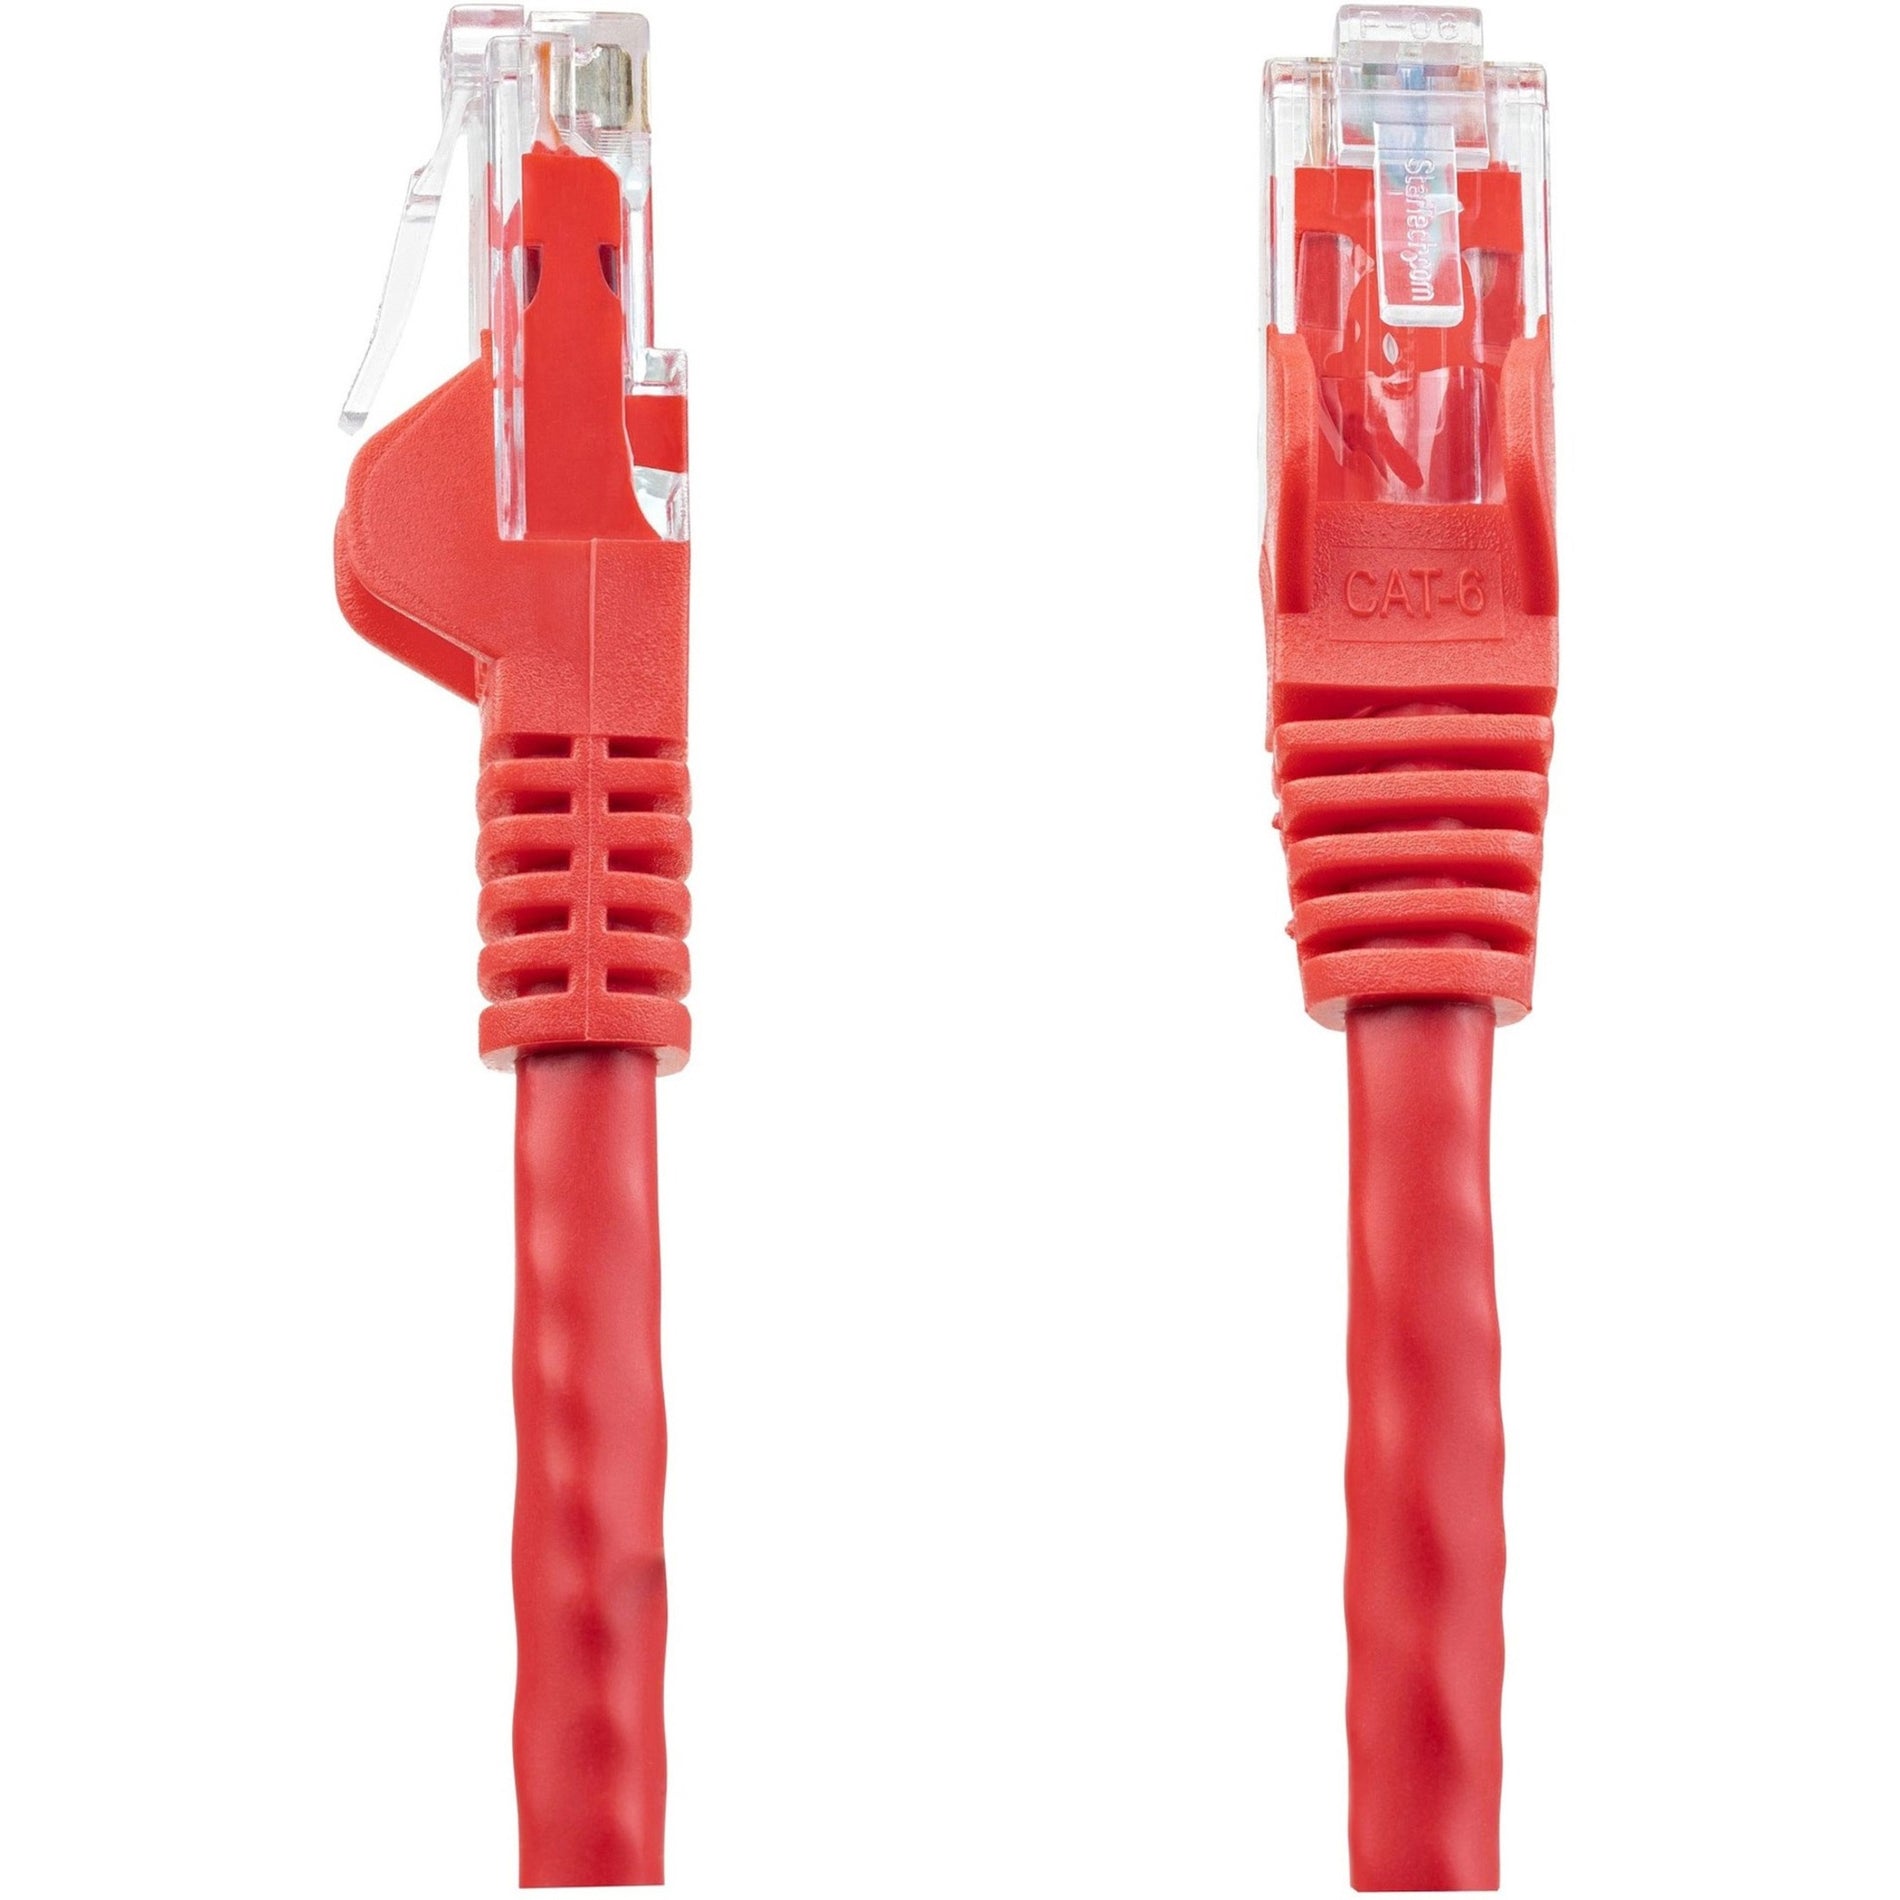 StarTech.com N6PATCH7RD 7 ft Red Snagless Cat6 UTP Patch Cable, Lifetime Warranty, ETL Verified